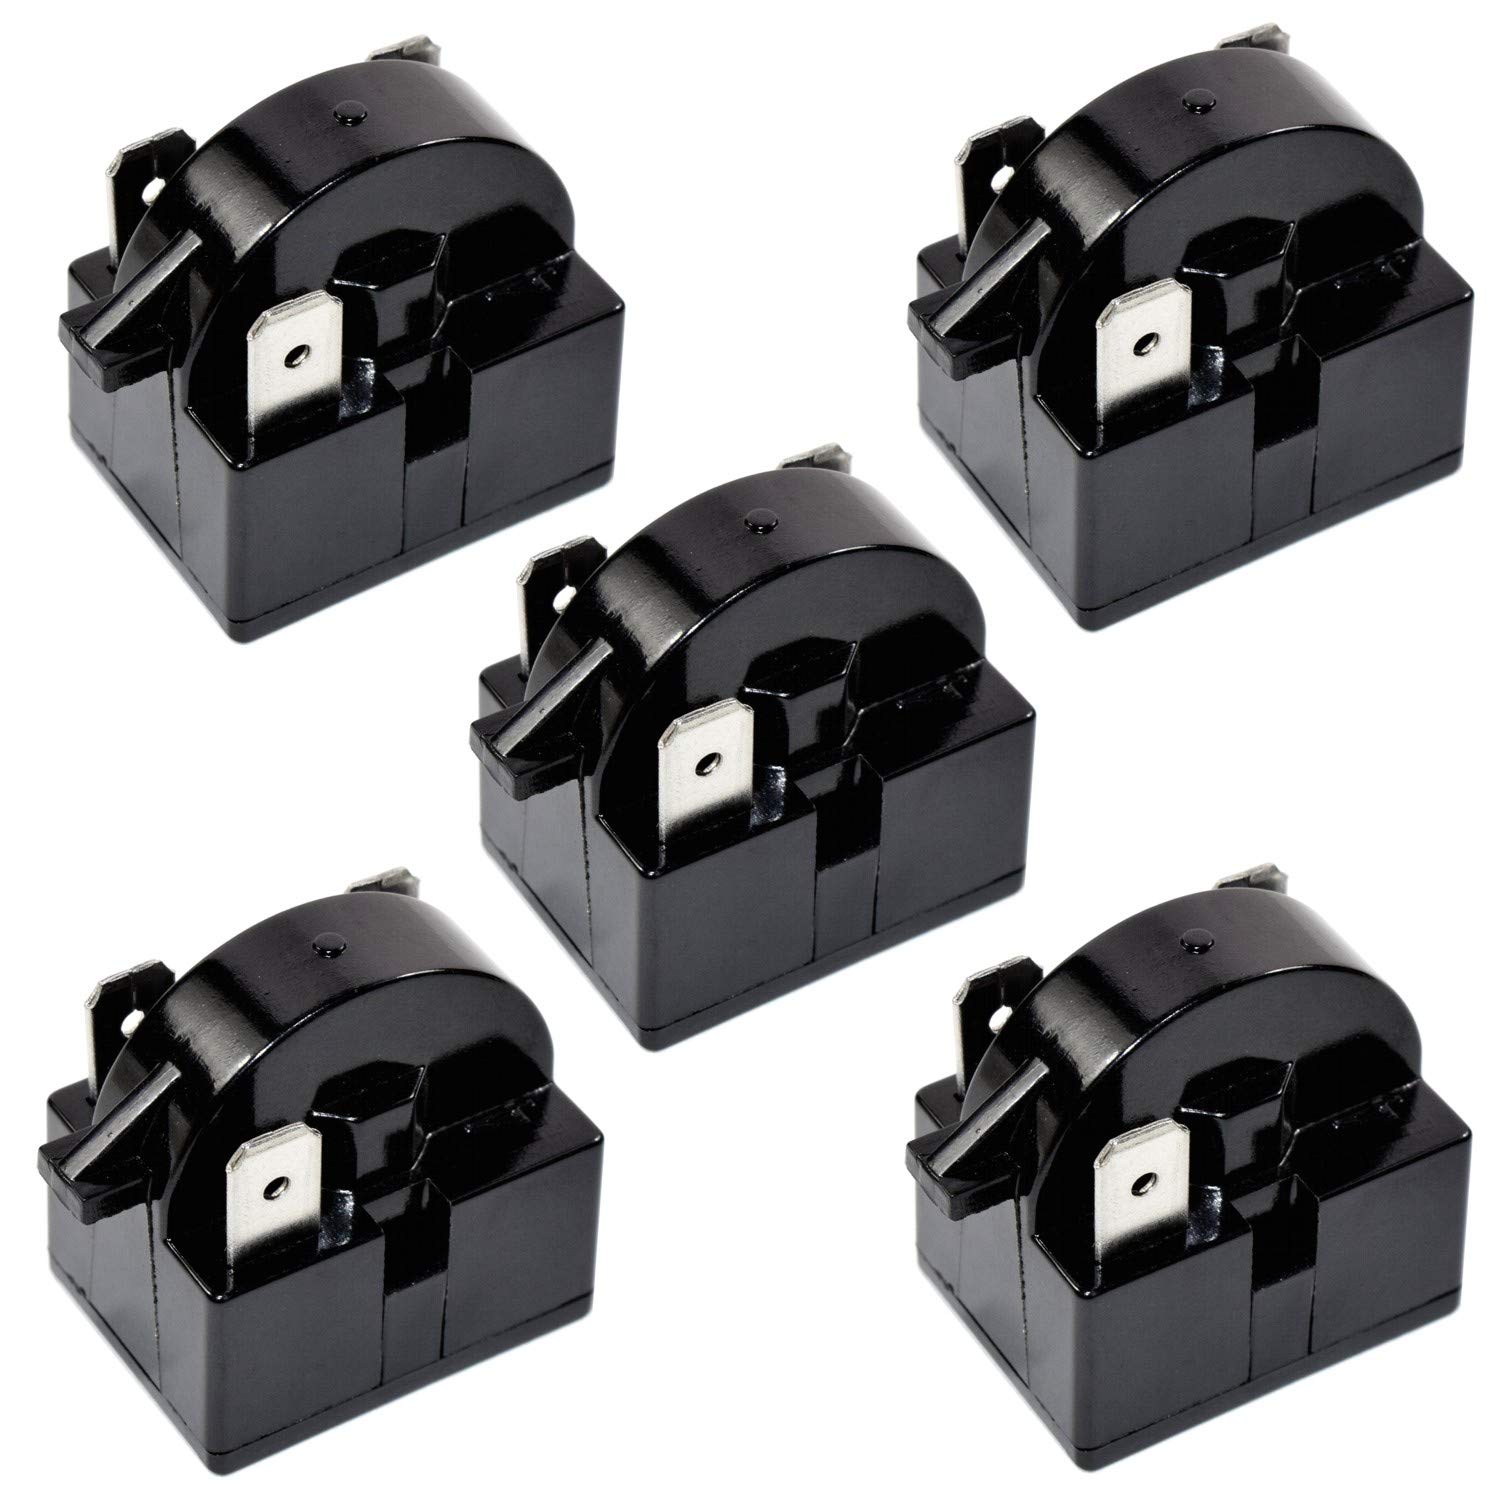 HQRP 5-Pack QP2-4R7 4.7 Ohm 3-Pin PTC Starter/Start Relay Replacement for Mini Fridges, Compact Refrigerators, Beverage & Wine/Beer